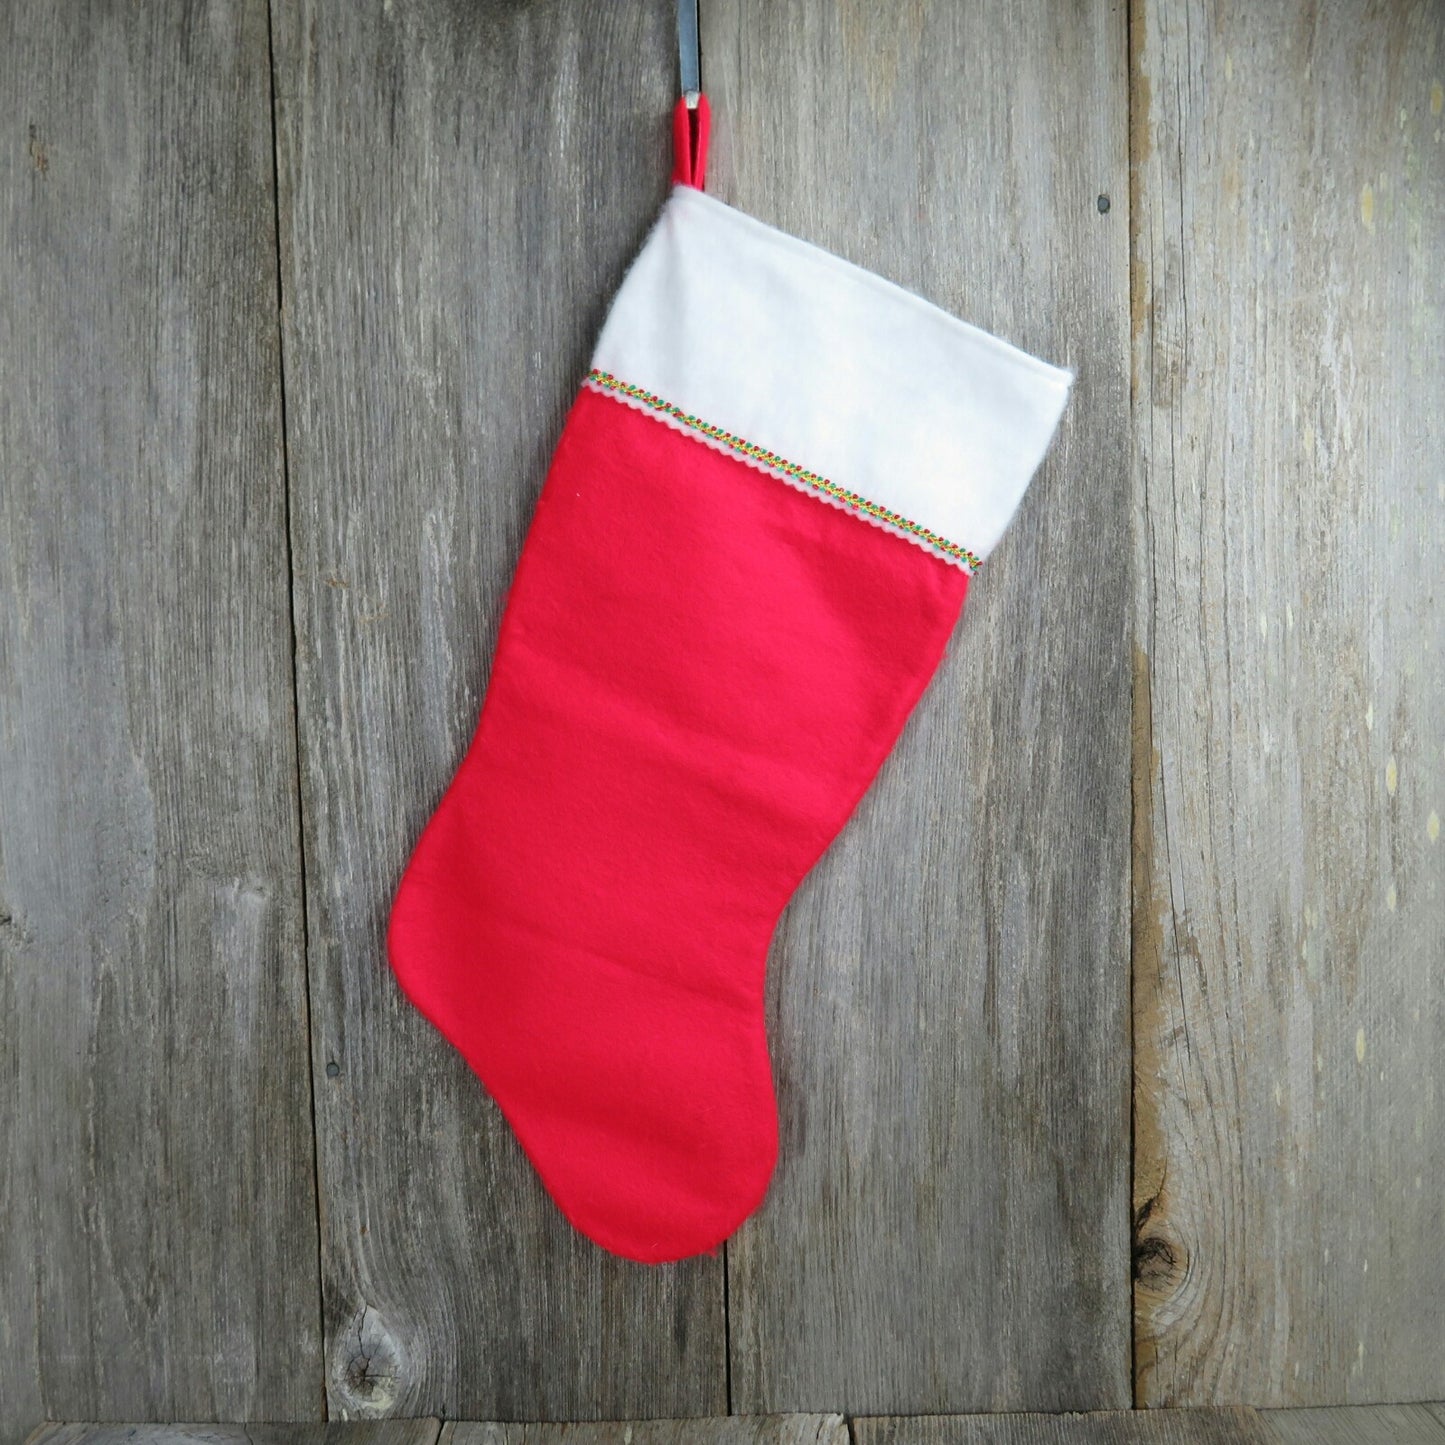 Vintage Fleece Christmas Stocking Red Felt Fuzzy White Cuff Trim Traditional ST111 Holiday Decor - At Grandma's Table